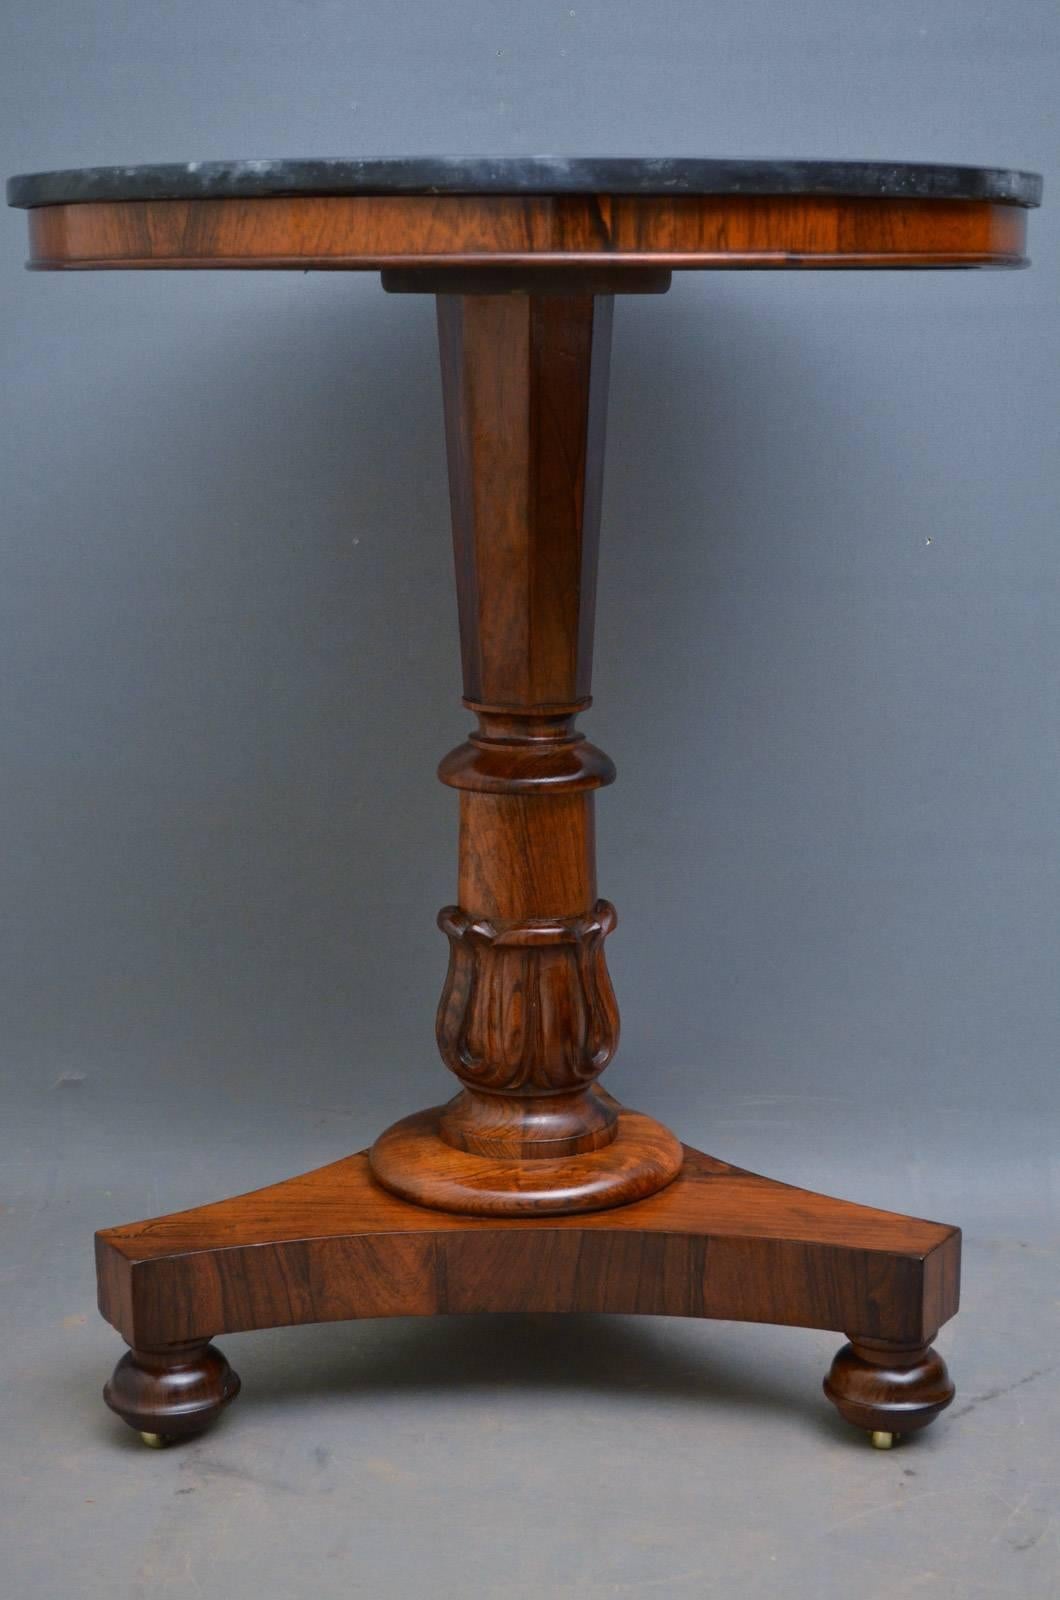 British William IV Marble-Topped Centre Table in Rosewood